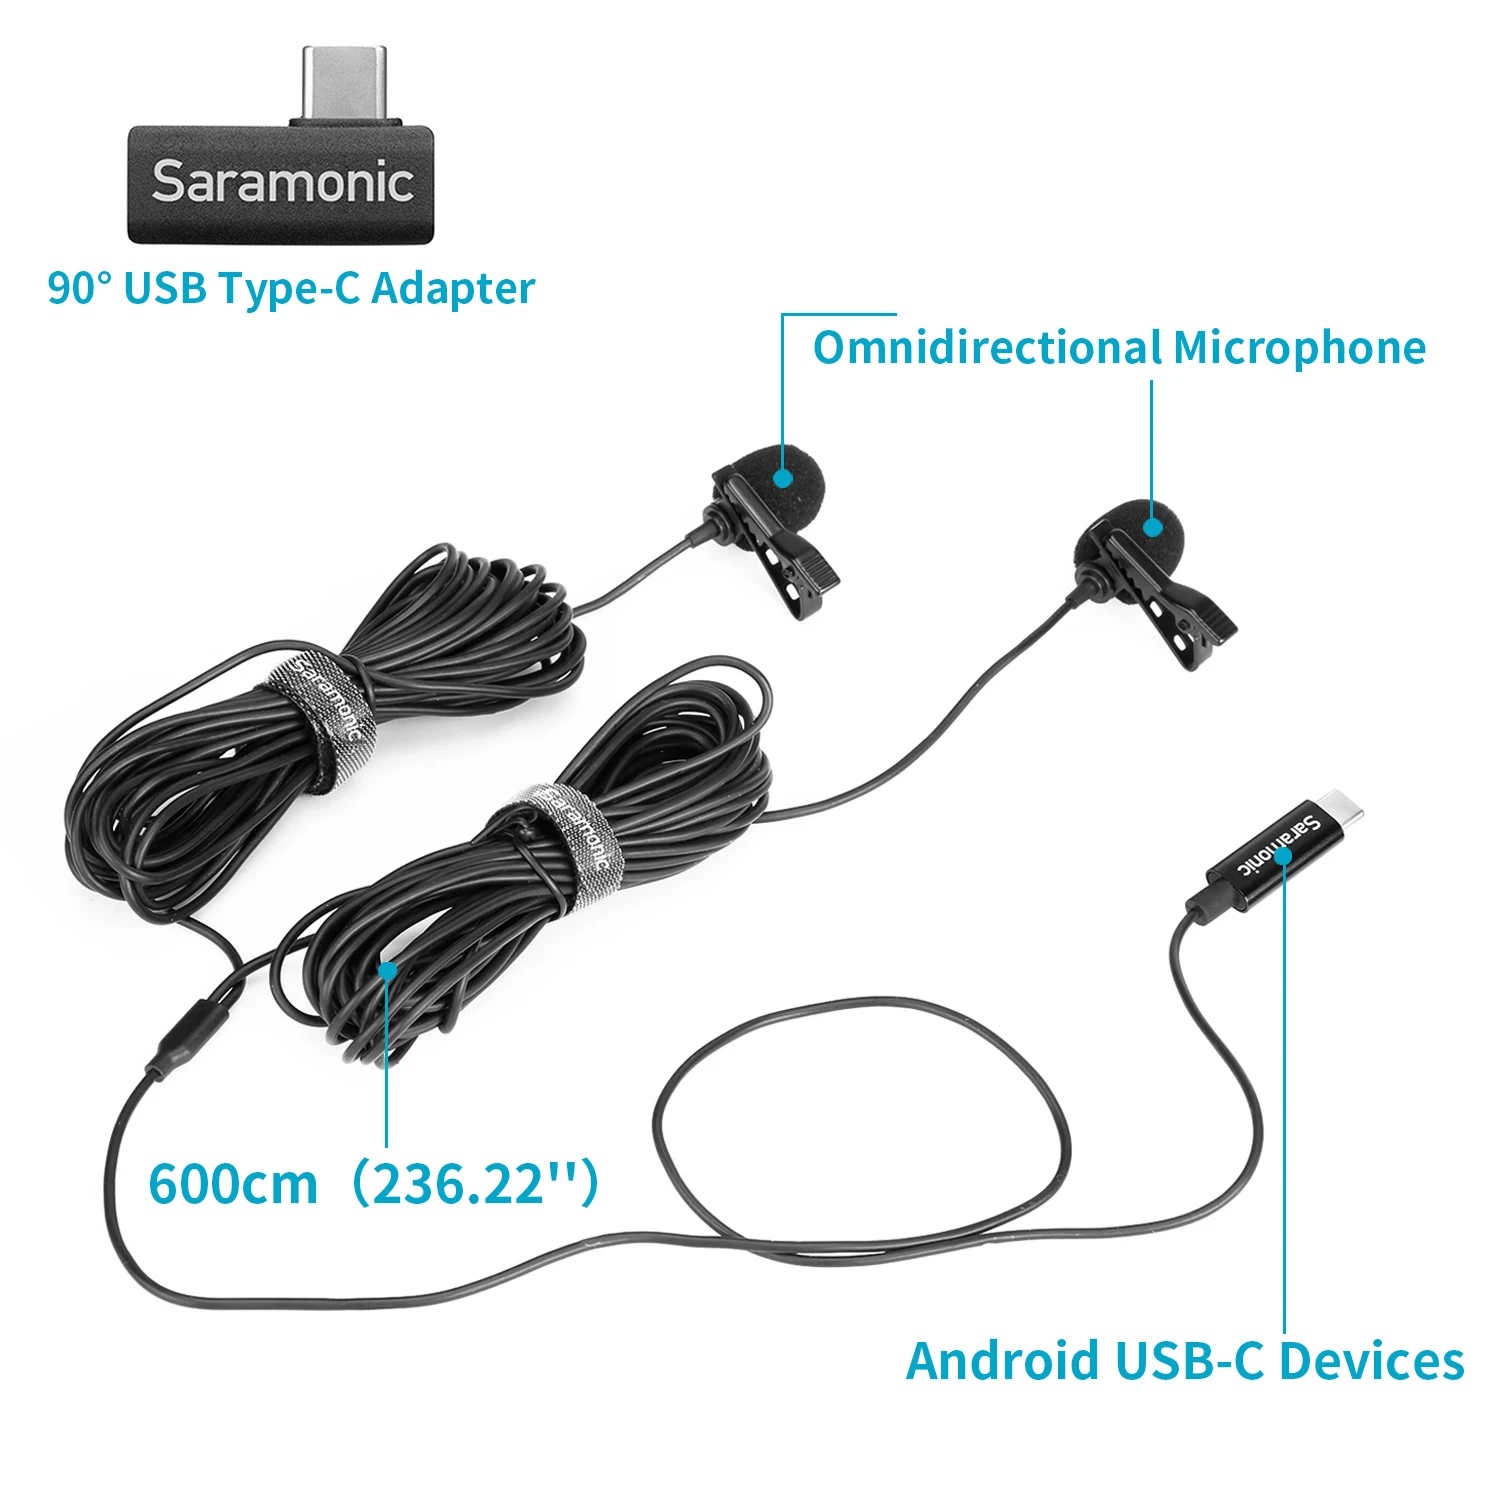 Saramonic LavMicro U3 Series Type-C Condenser Lavalier Lapel Microphone for Mobile Phone Android DJI Osmo Action Pocket Youtube